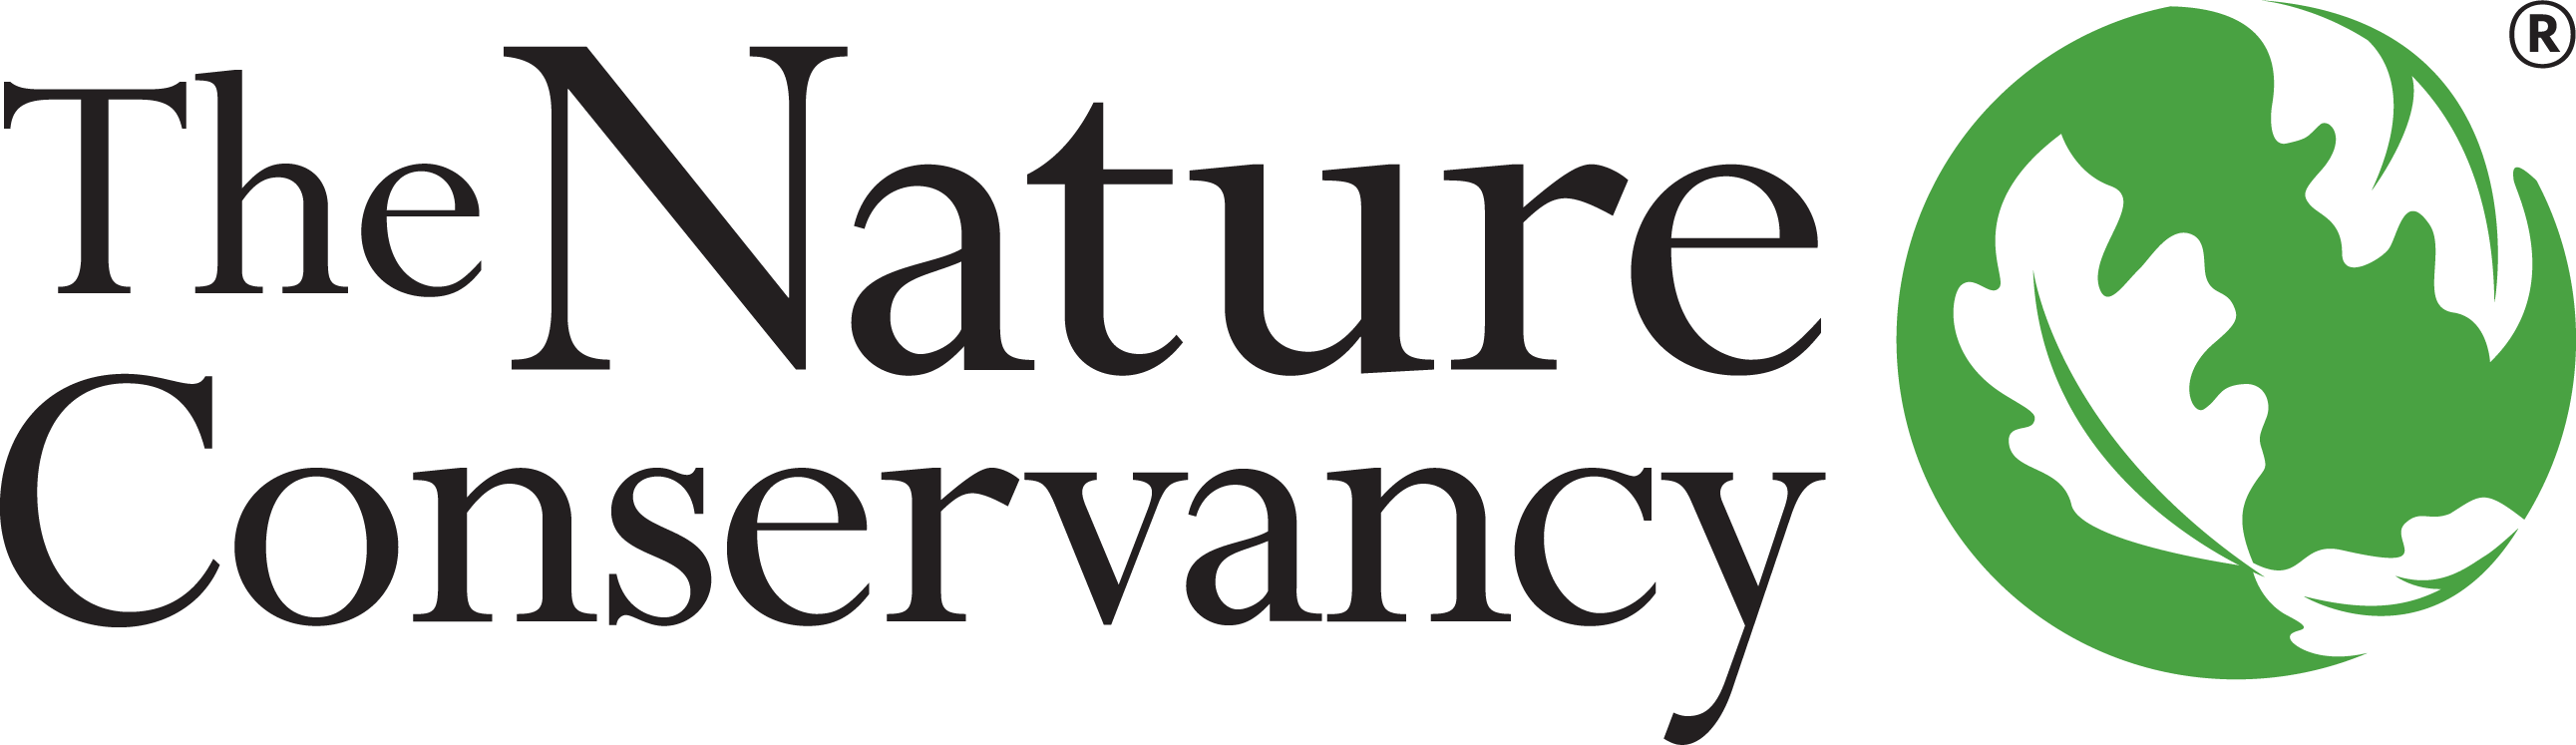 The Natures Conservancy